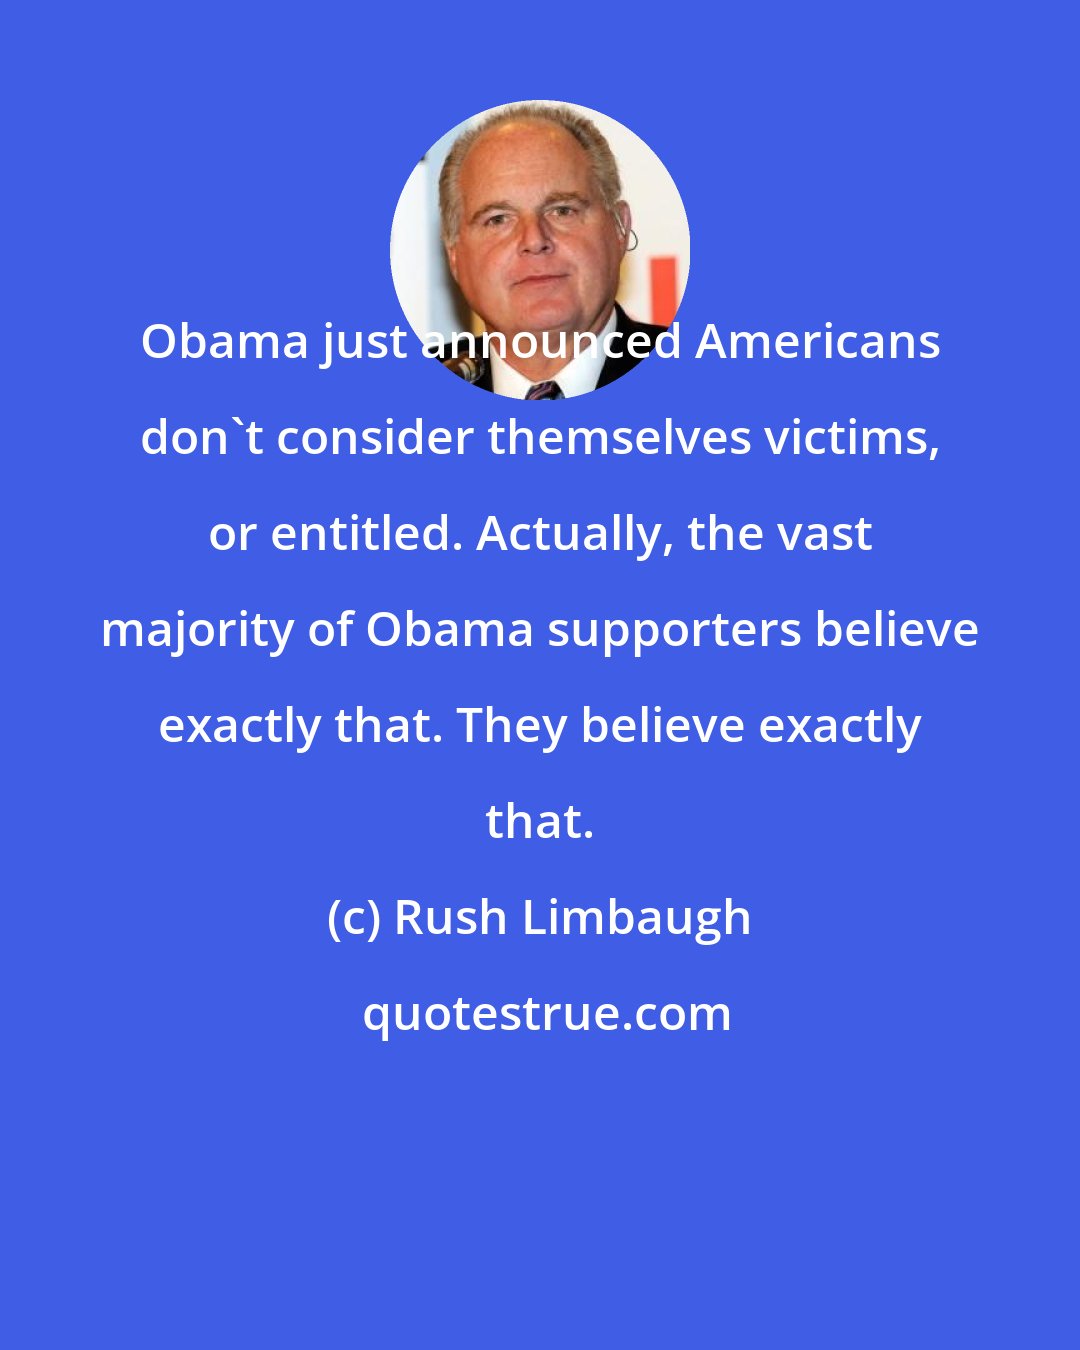 Rush Limbaugh: Obama just announced Americans don't consider themselves victims, or entitled. Actually, the vast majority of Obama supporters believe exactly that. They believe exactly that.